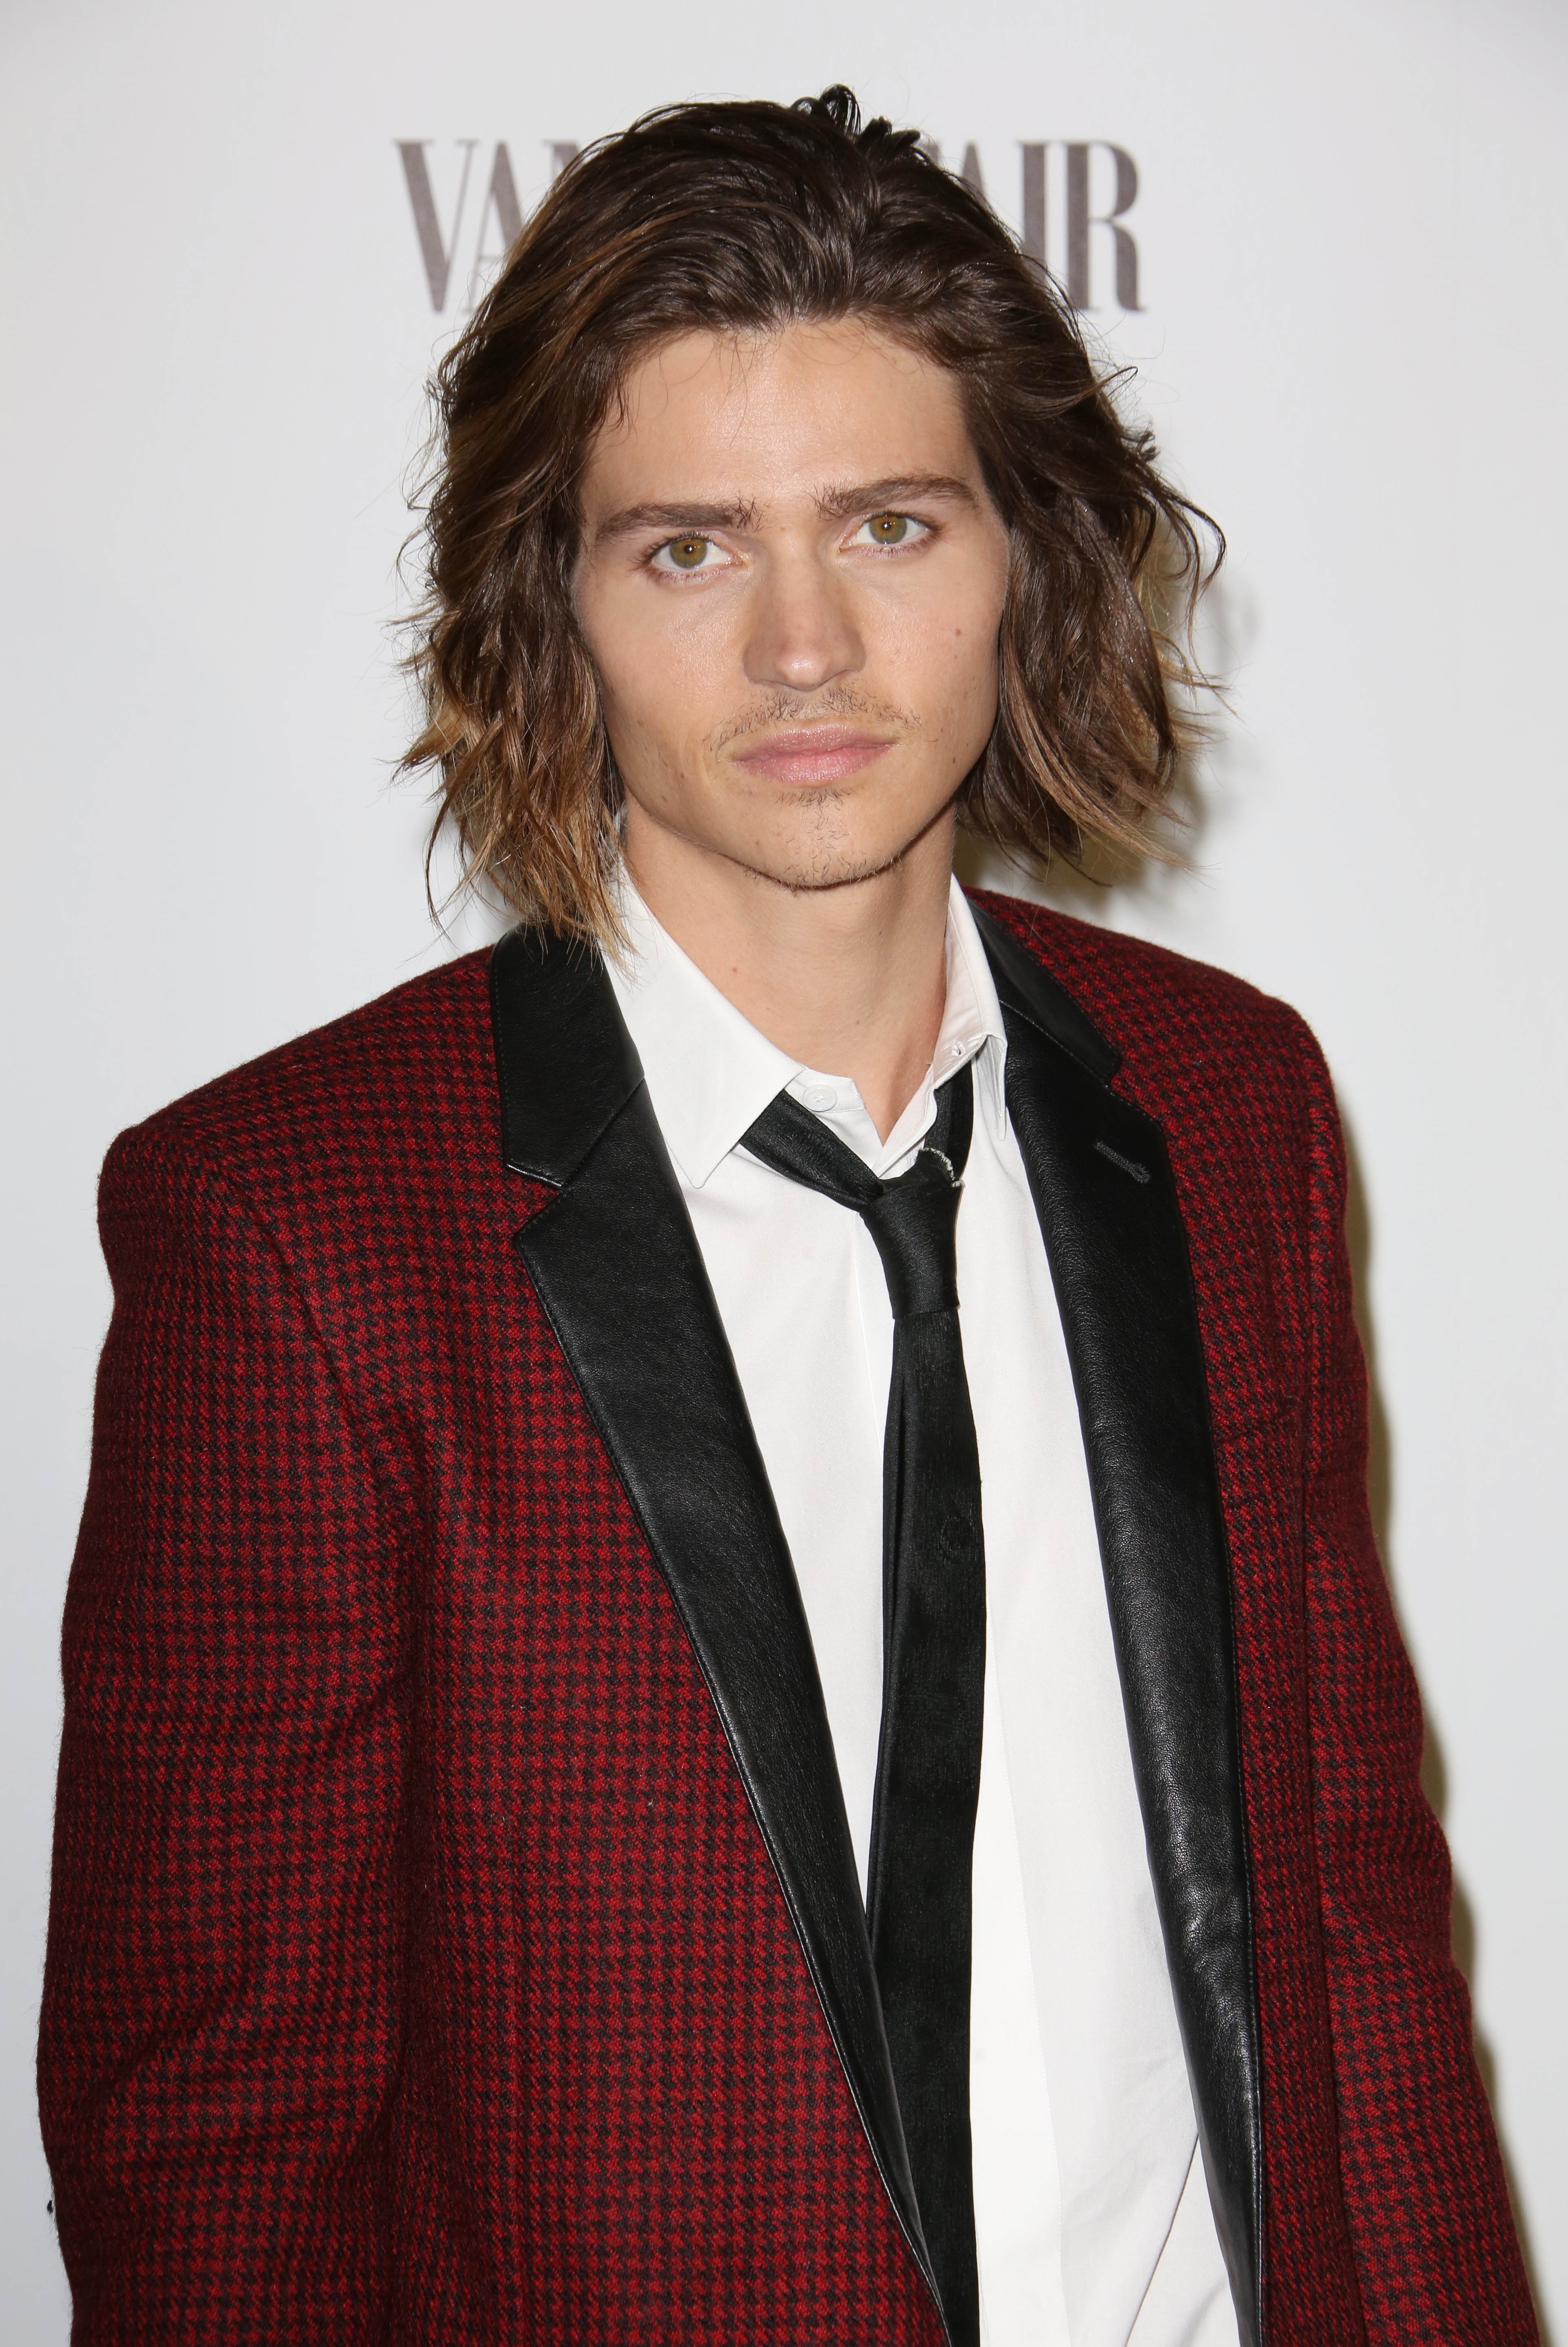 Will Peltz attends Vanity Fair and FIAT celebration of Young Hollywood, hosted by Krista Smith and James Corden, to benefit the Terrence Higgins Trust at No Vacancy on February 17, 2015 in Los Angeles, California